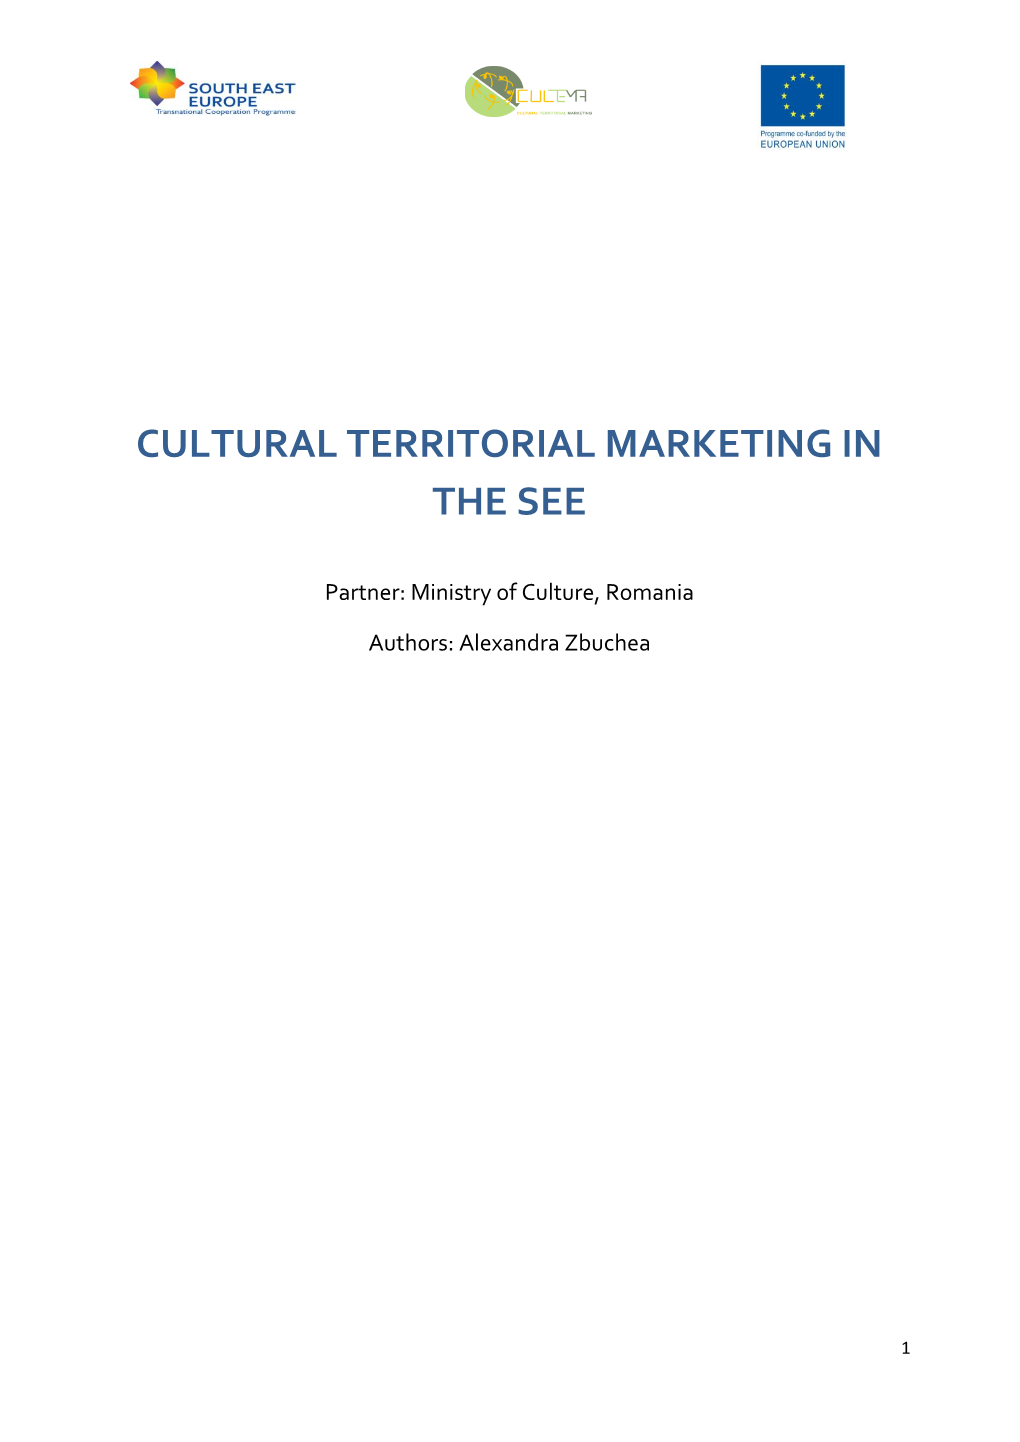 Cultural Territorial Marketing for Southeast